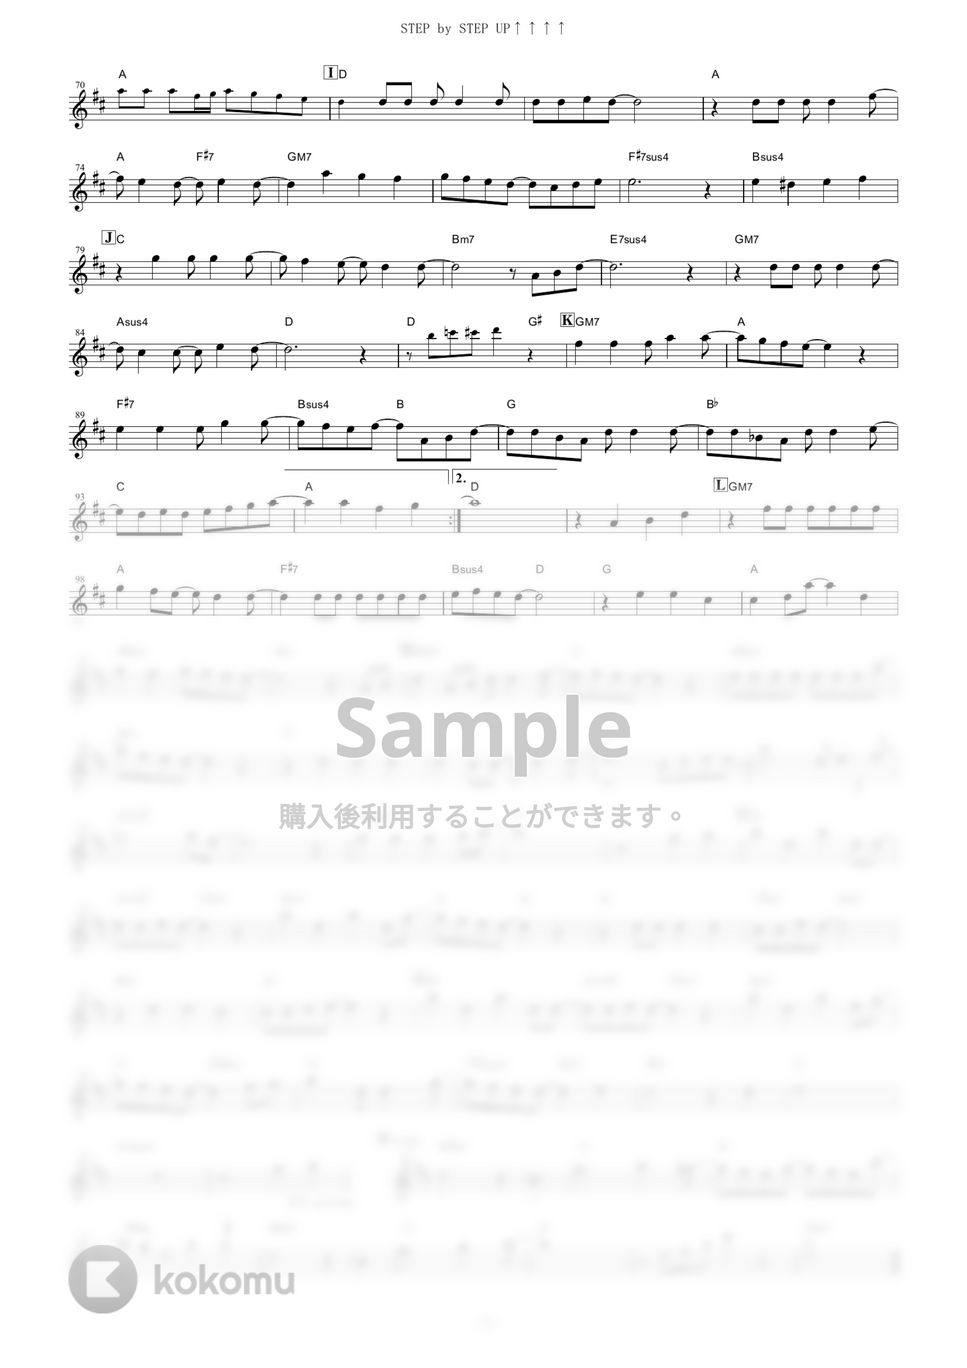 fourfolium - STEP by STEP UP↑↑↑↑ (『NEW GAME!!』 / in Eb) by muta-sax